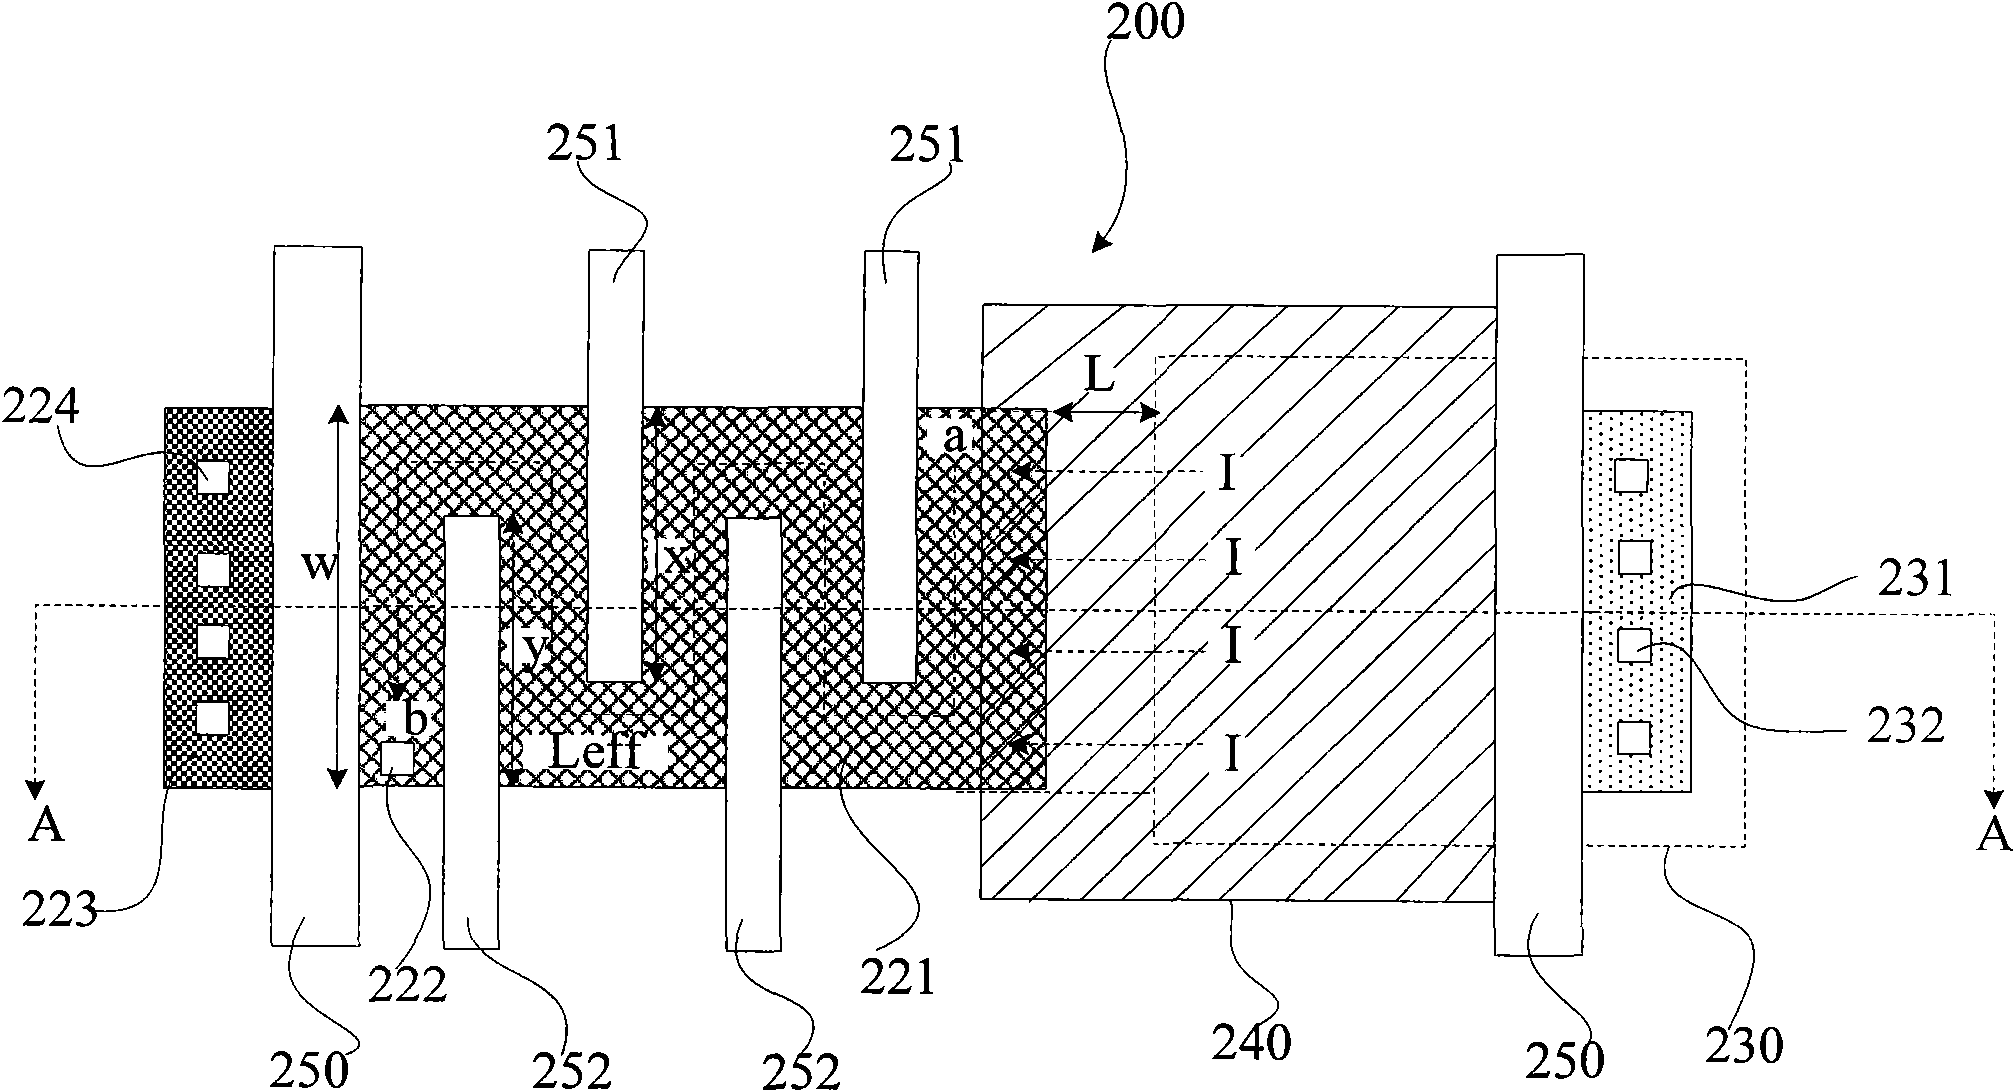 LDMOS ESD(Laterally Diffused Metal Oxide Semiconductor Electro-Static Discharge) structure